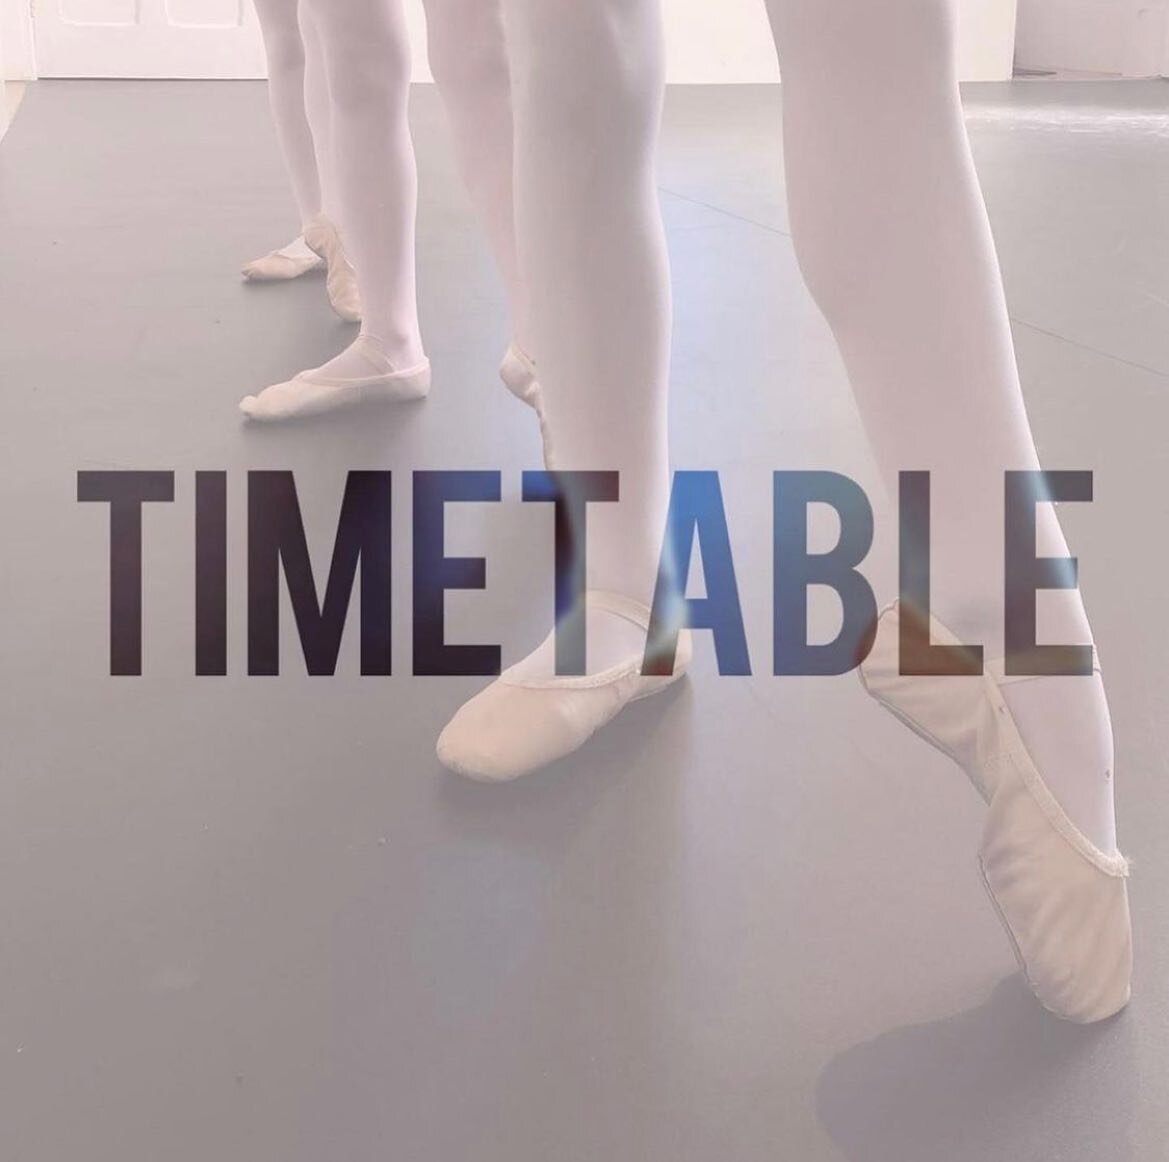 Our new September timetable is now available! 

Go to www.hscd.co.uk/timetable or check our stories! 

A few changes and a couple of new classes. Head over to check it out and send us a DM if you&rsquo;d like to try anything out. 

#danceschools #dan